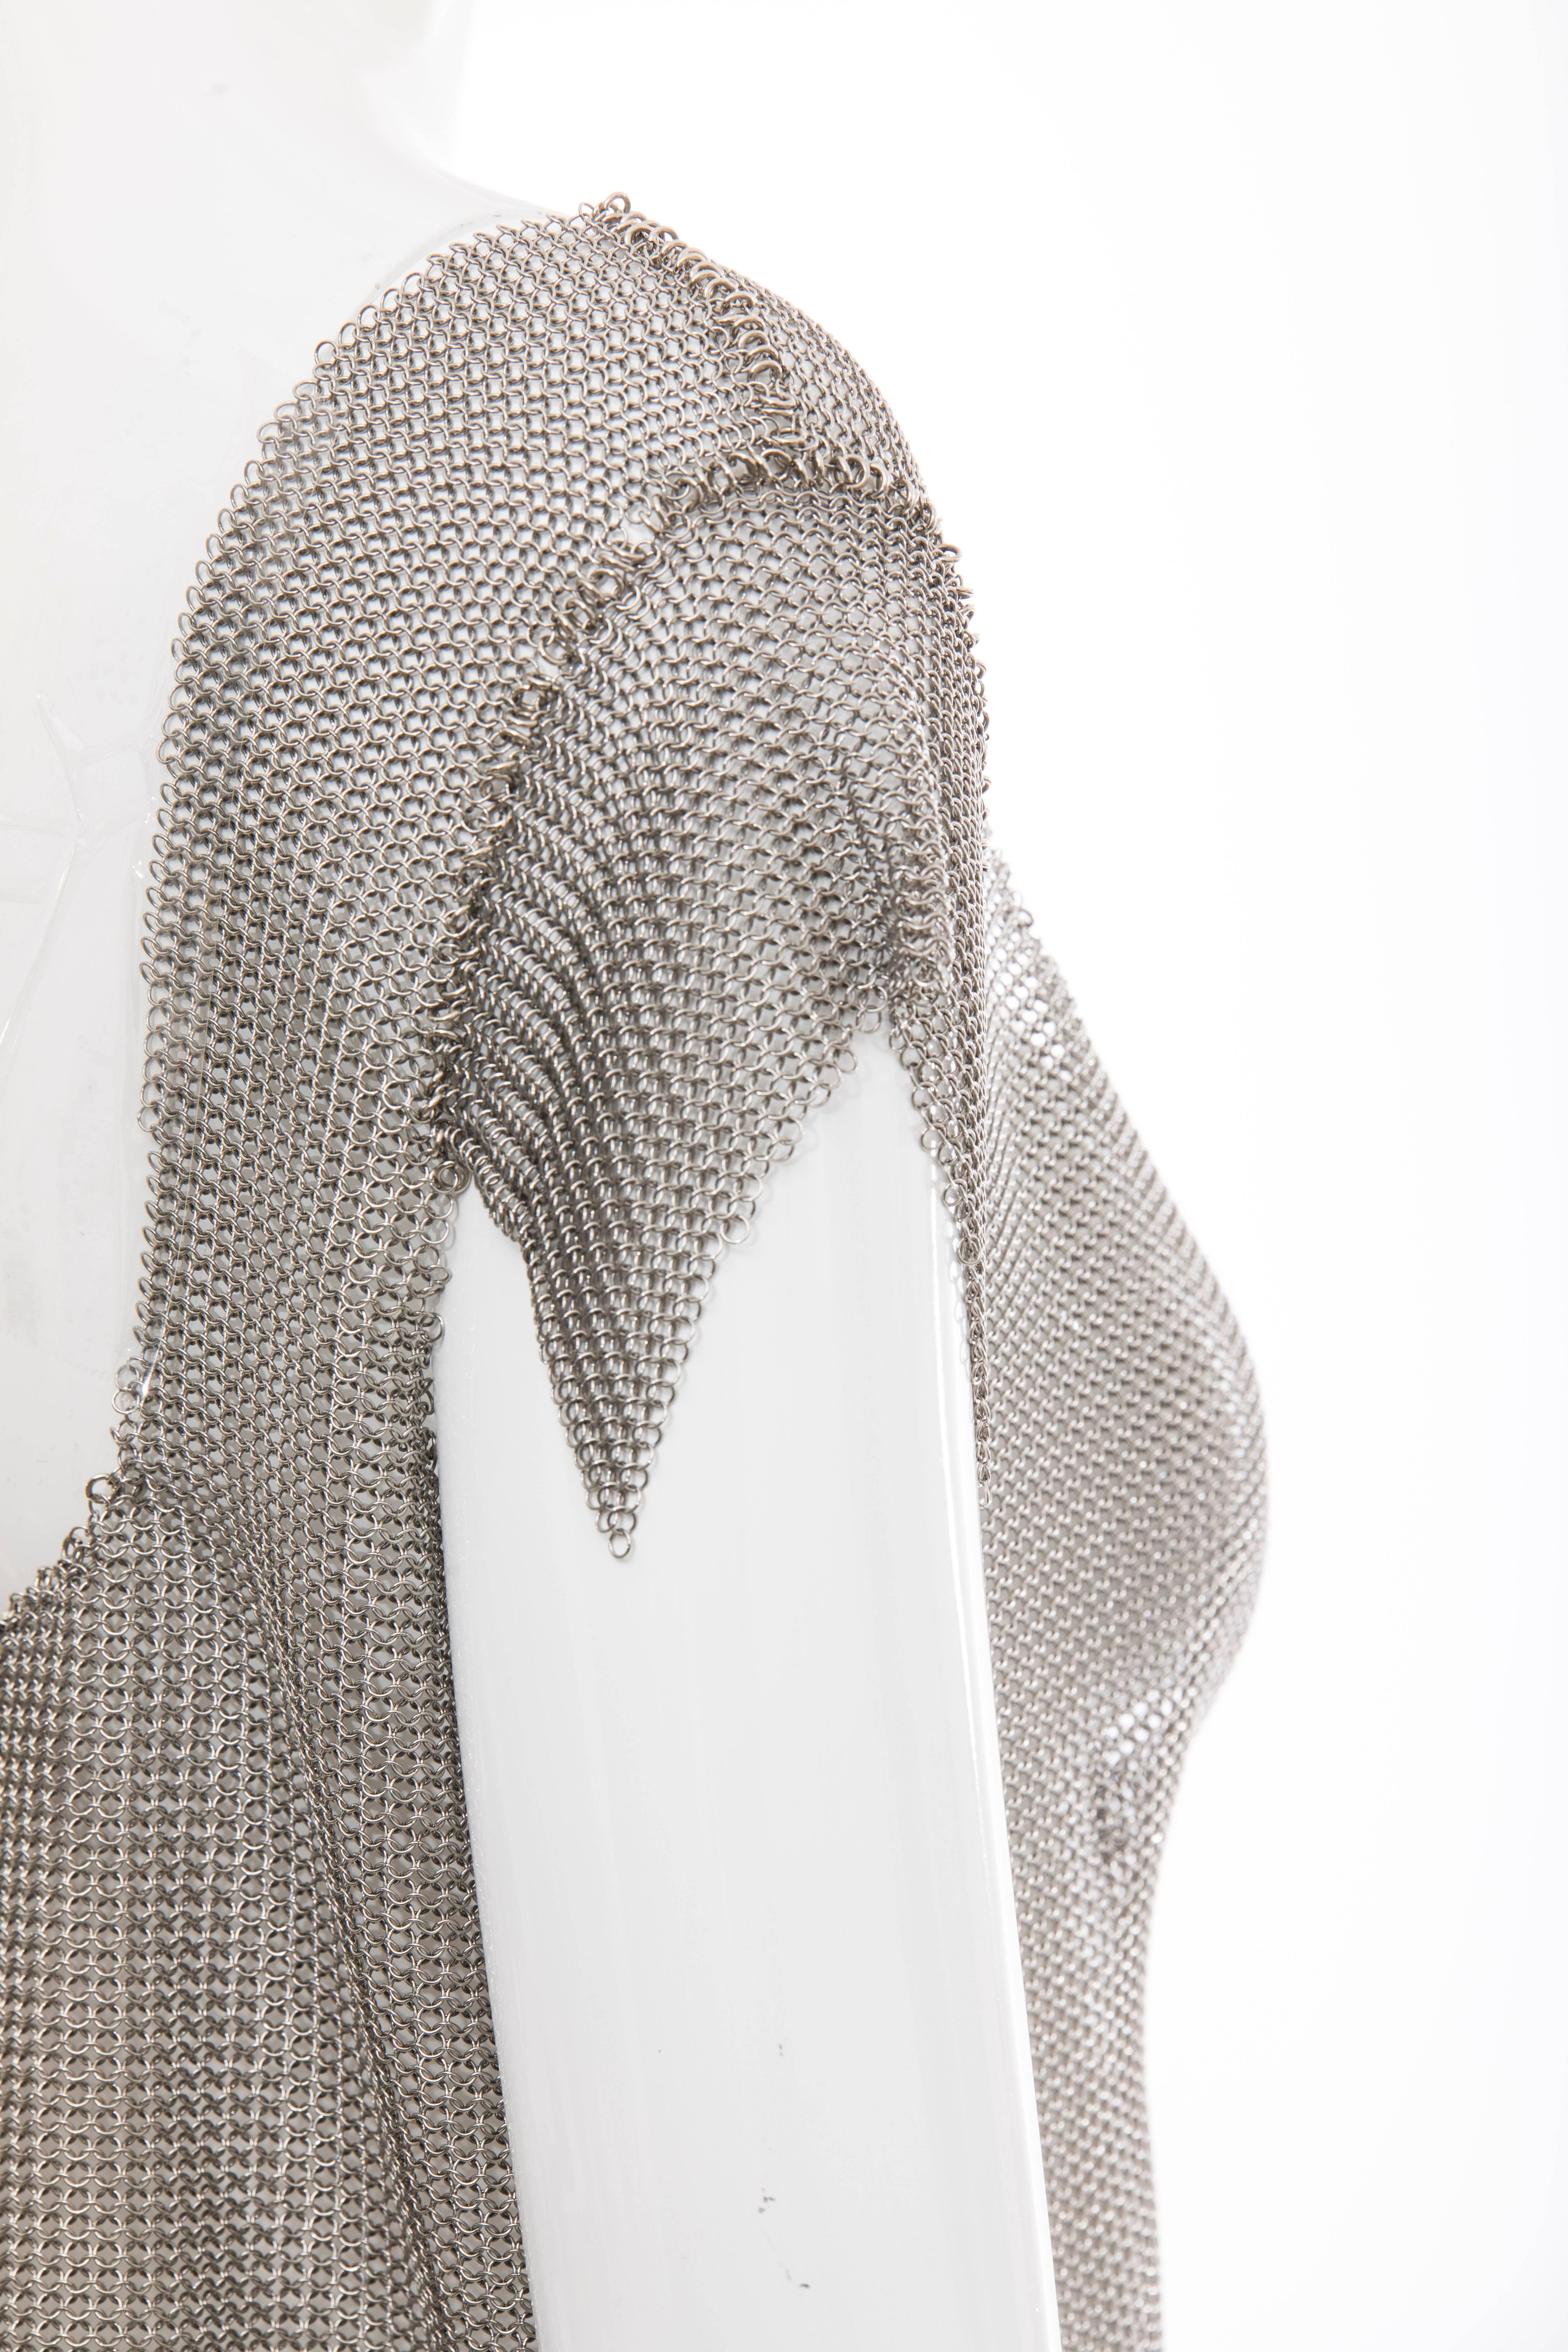 Prada Silver Chain Mail Top With Cap Sleeve, Fall 2002 2